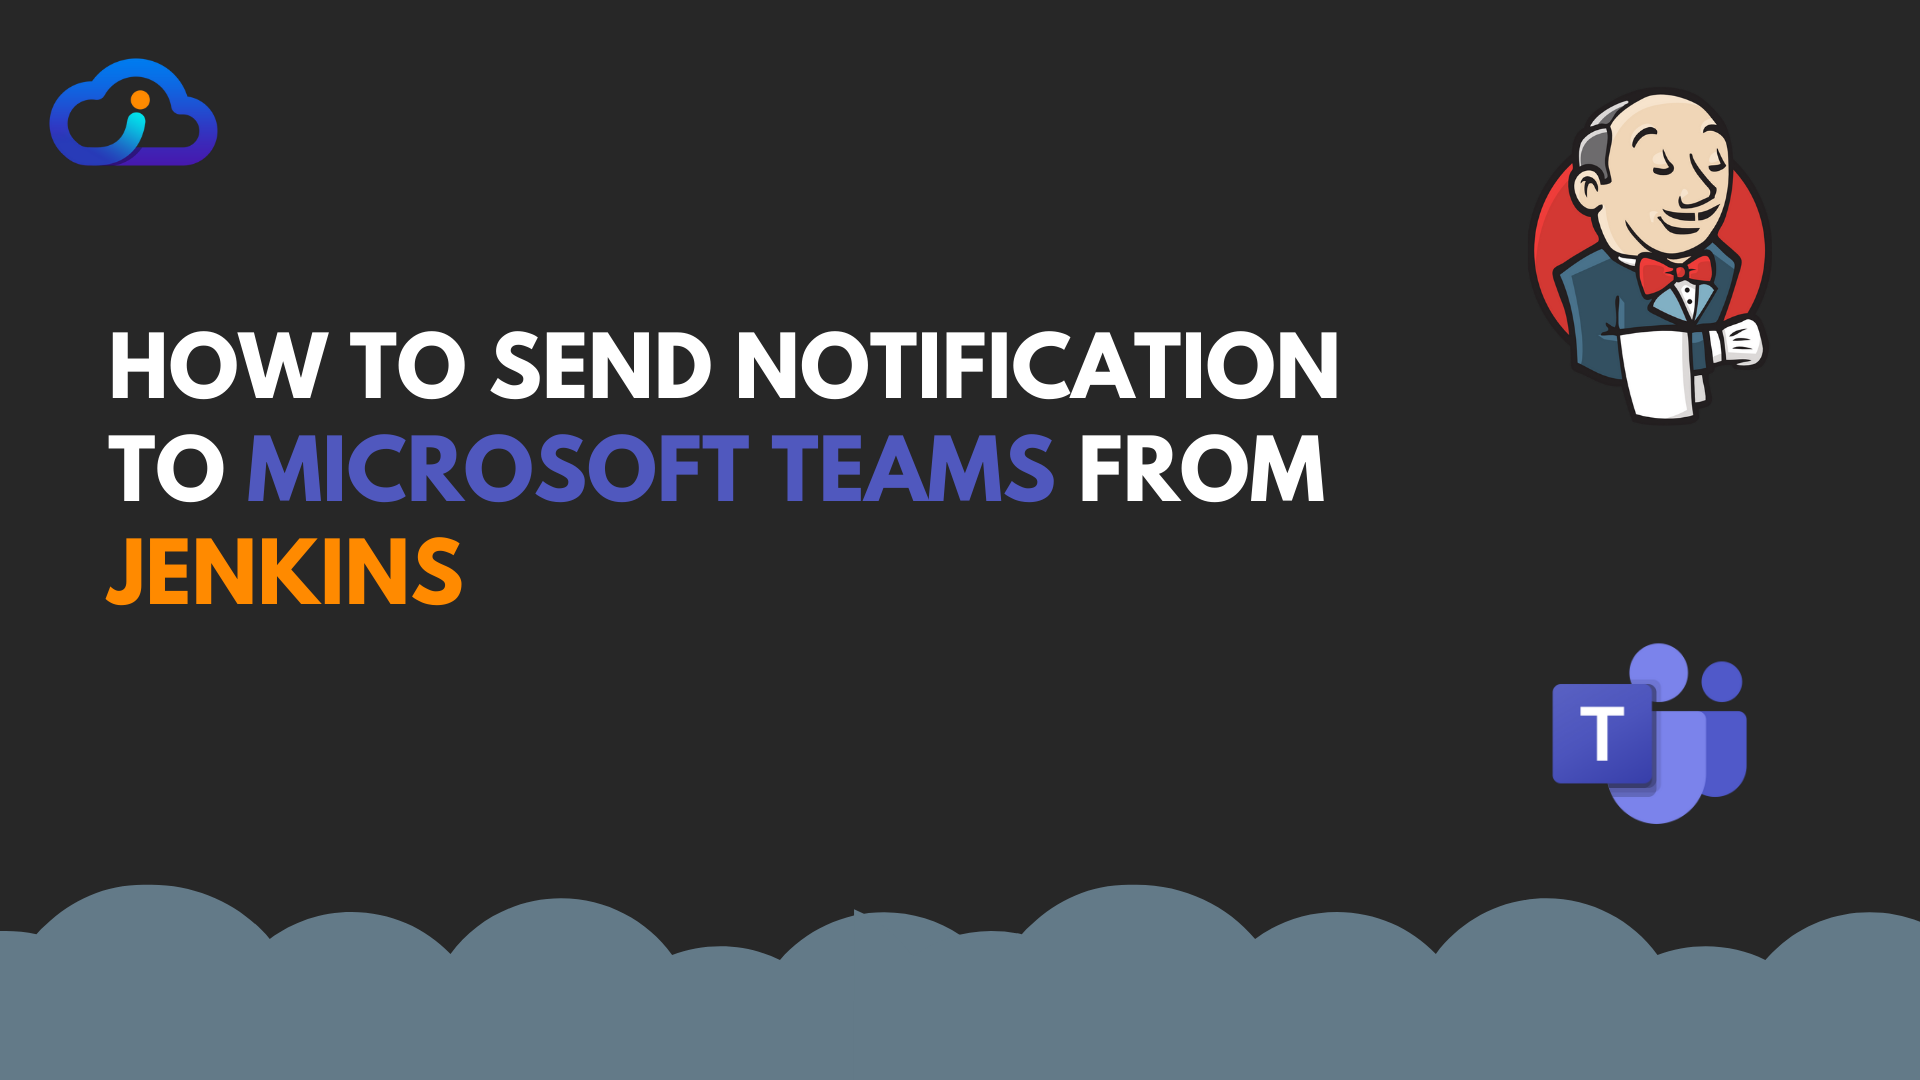 How to send notification to Microsoft teams from Jenkins